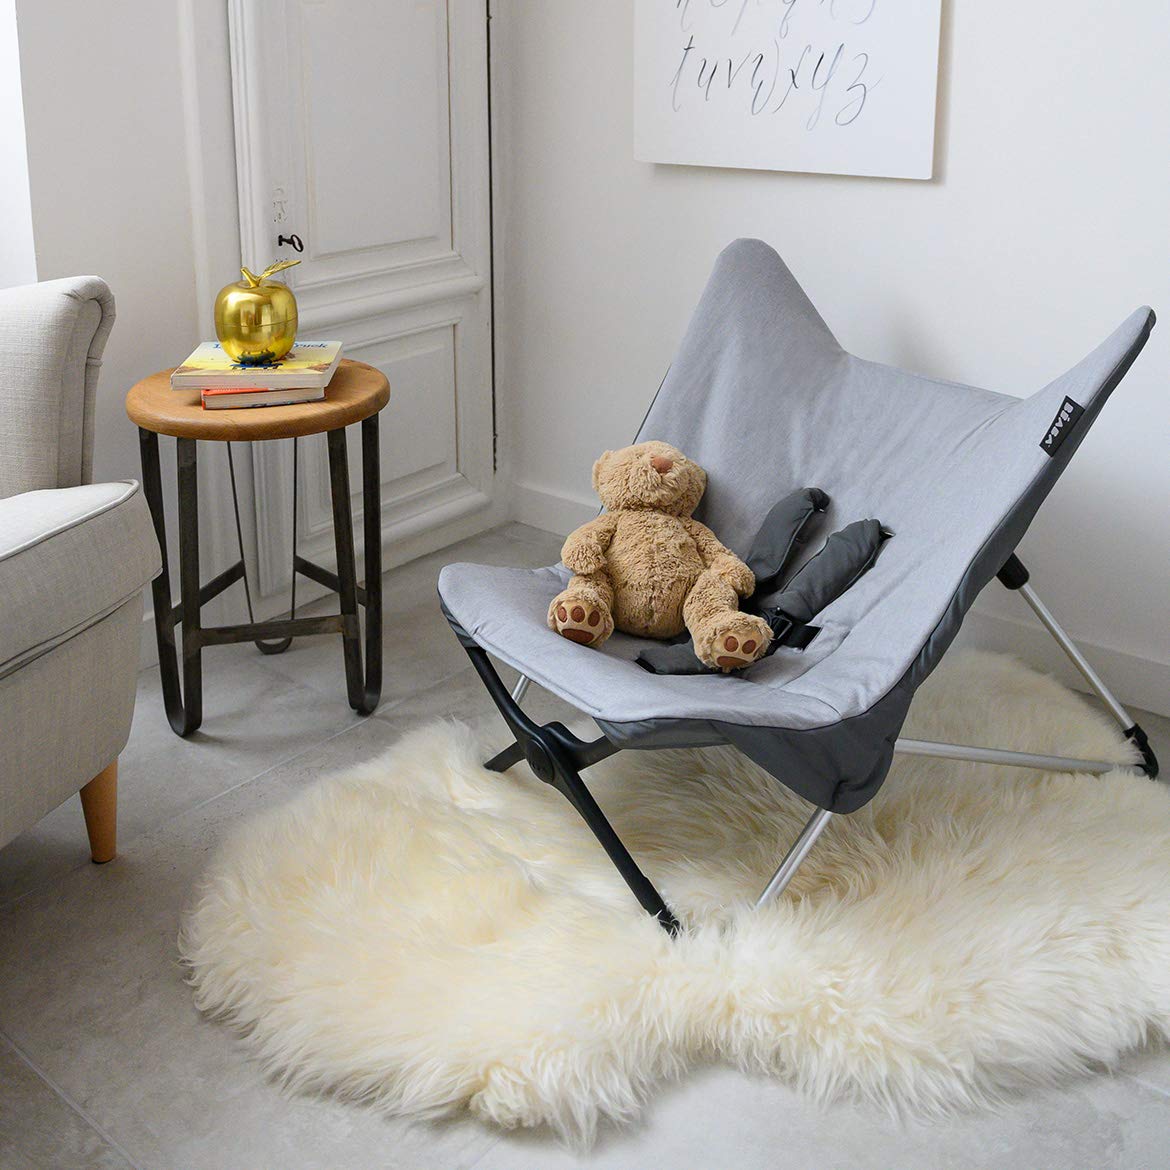 BÉABA - Bouncer for babies and toddlers - Compact and grows with you - Extremely comfortable - Foldable and easy to transport - Robust - Made in France - Gray